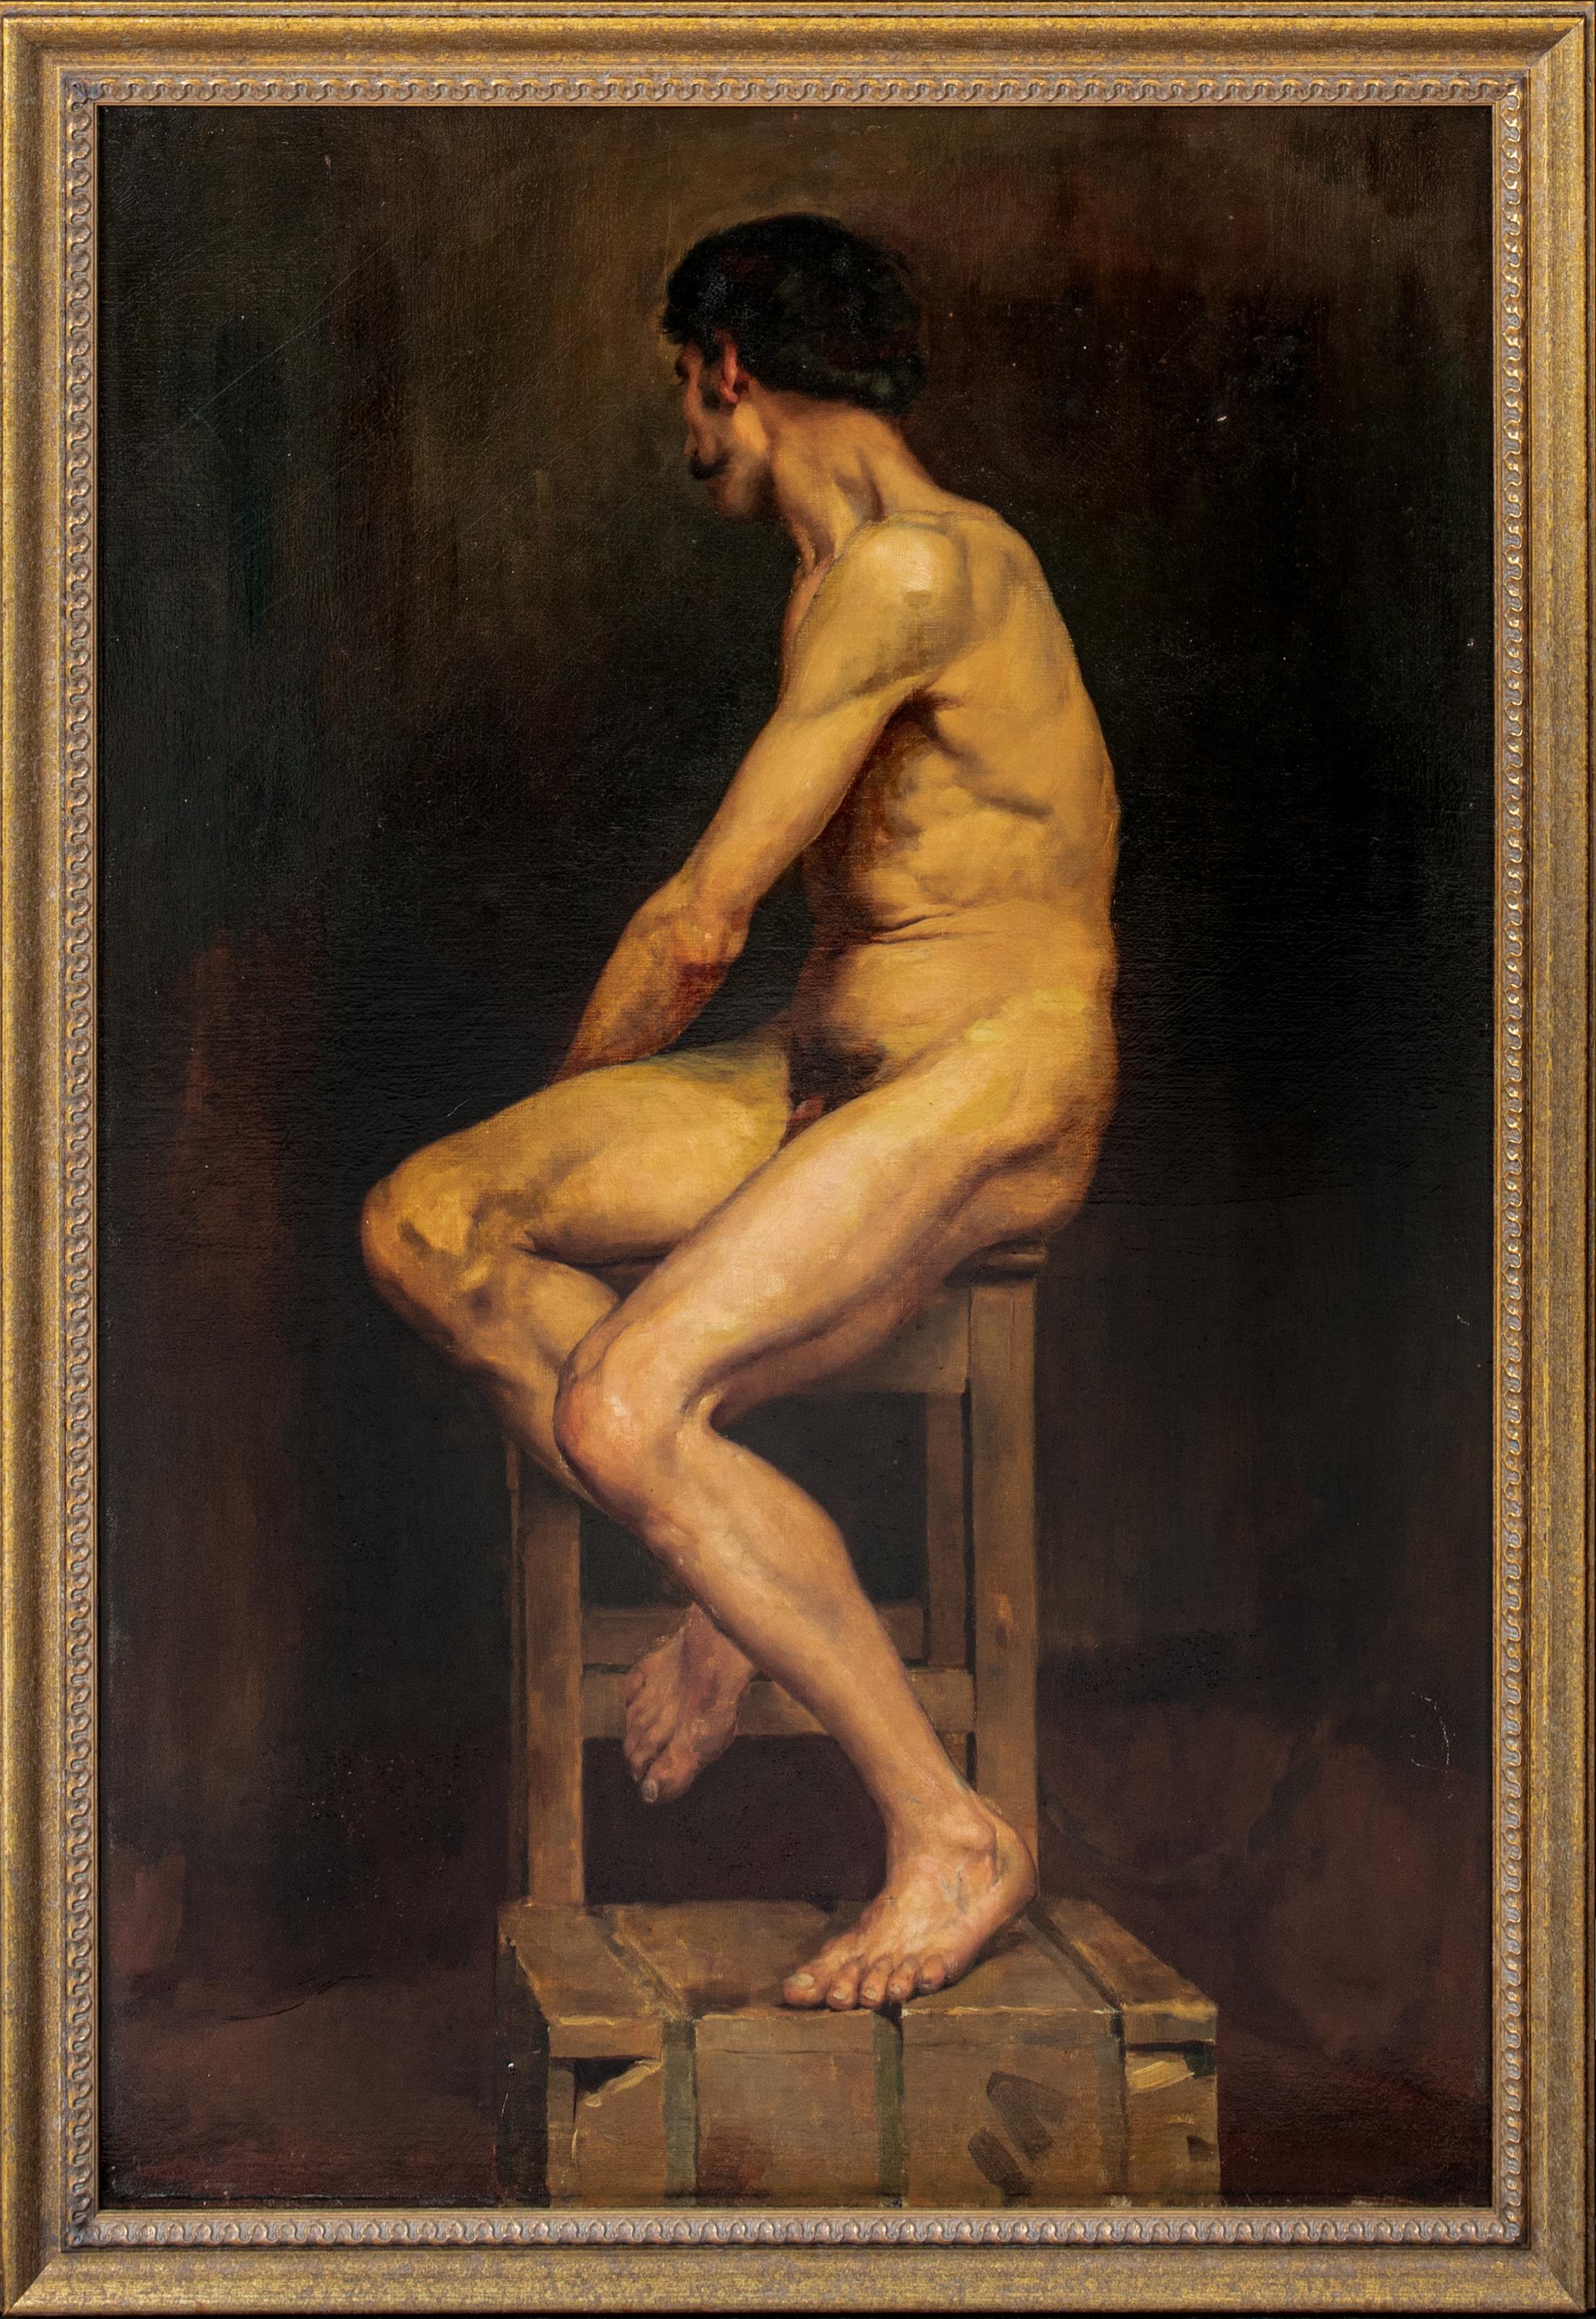 Unknown Nude Painting - Studio Male Nude, 19th Century Harold William Boutcher (1867-1903) Newlyn School